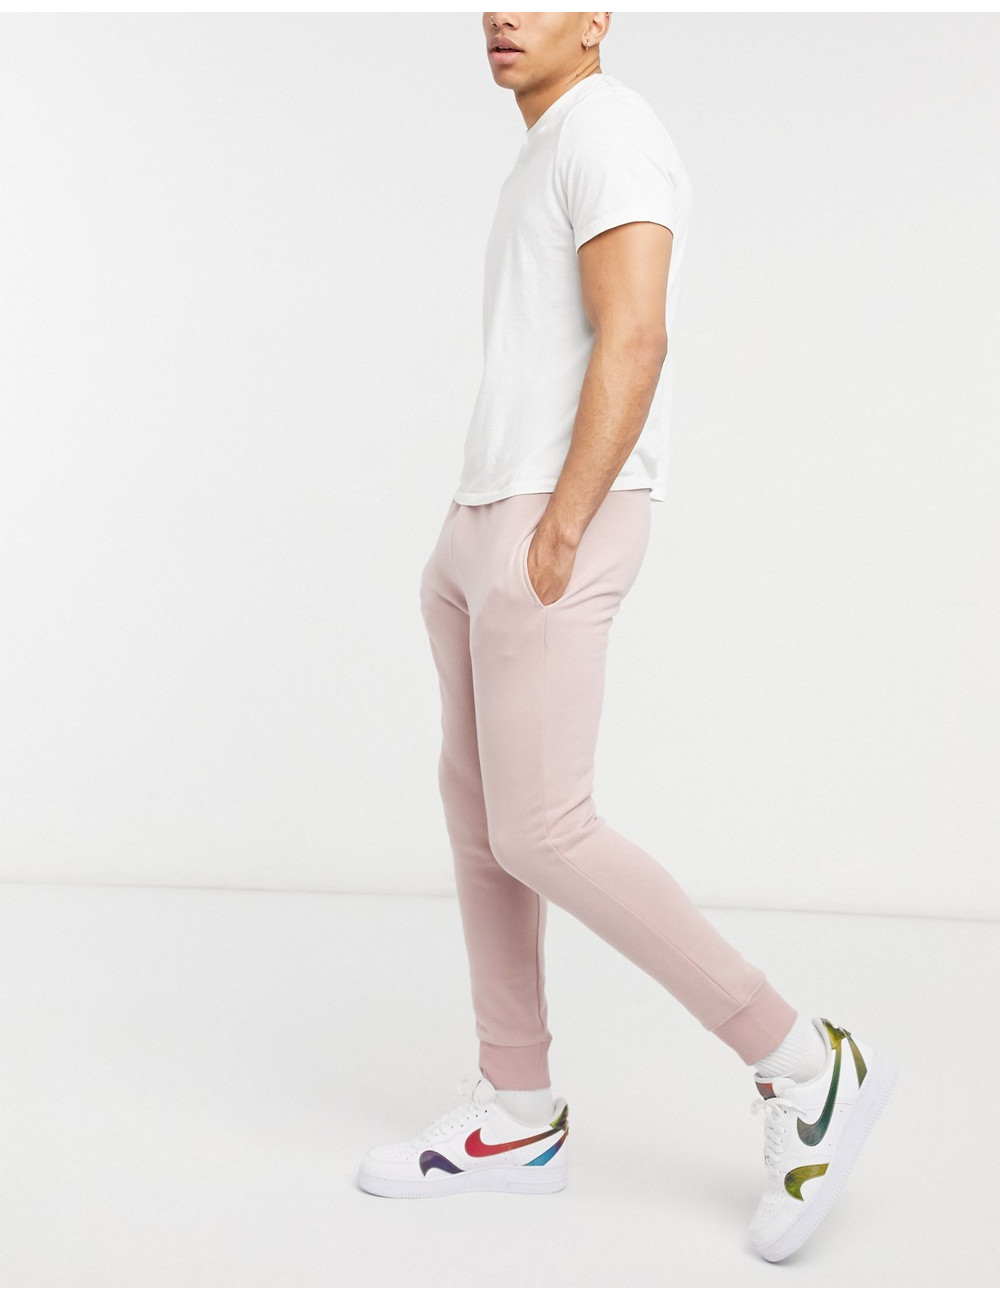 Topman co-ord joggers in mauve